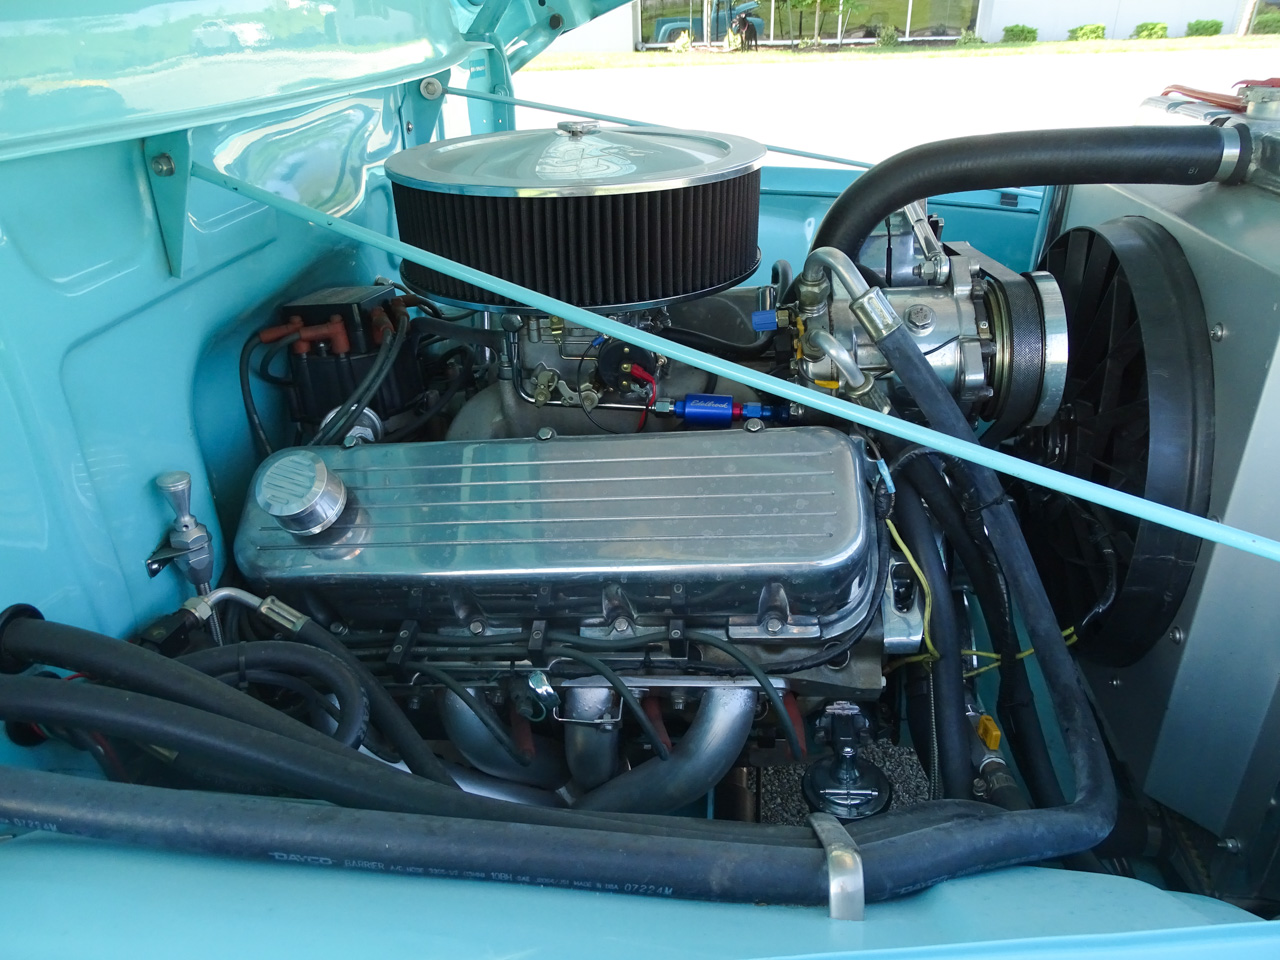 1956 Ford F100: Exploring the Timeless Charm of the Blue Classic